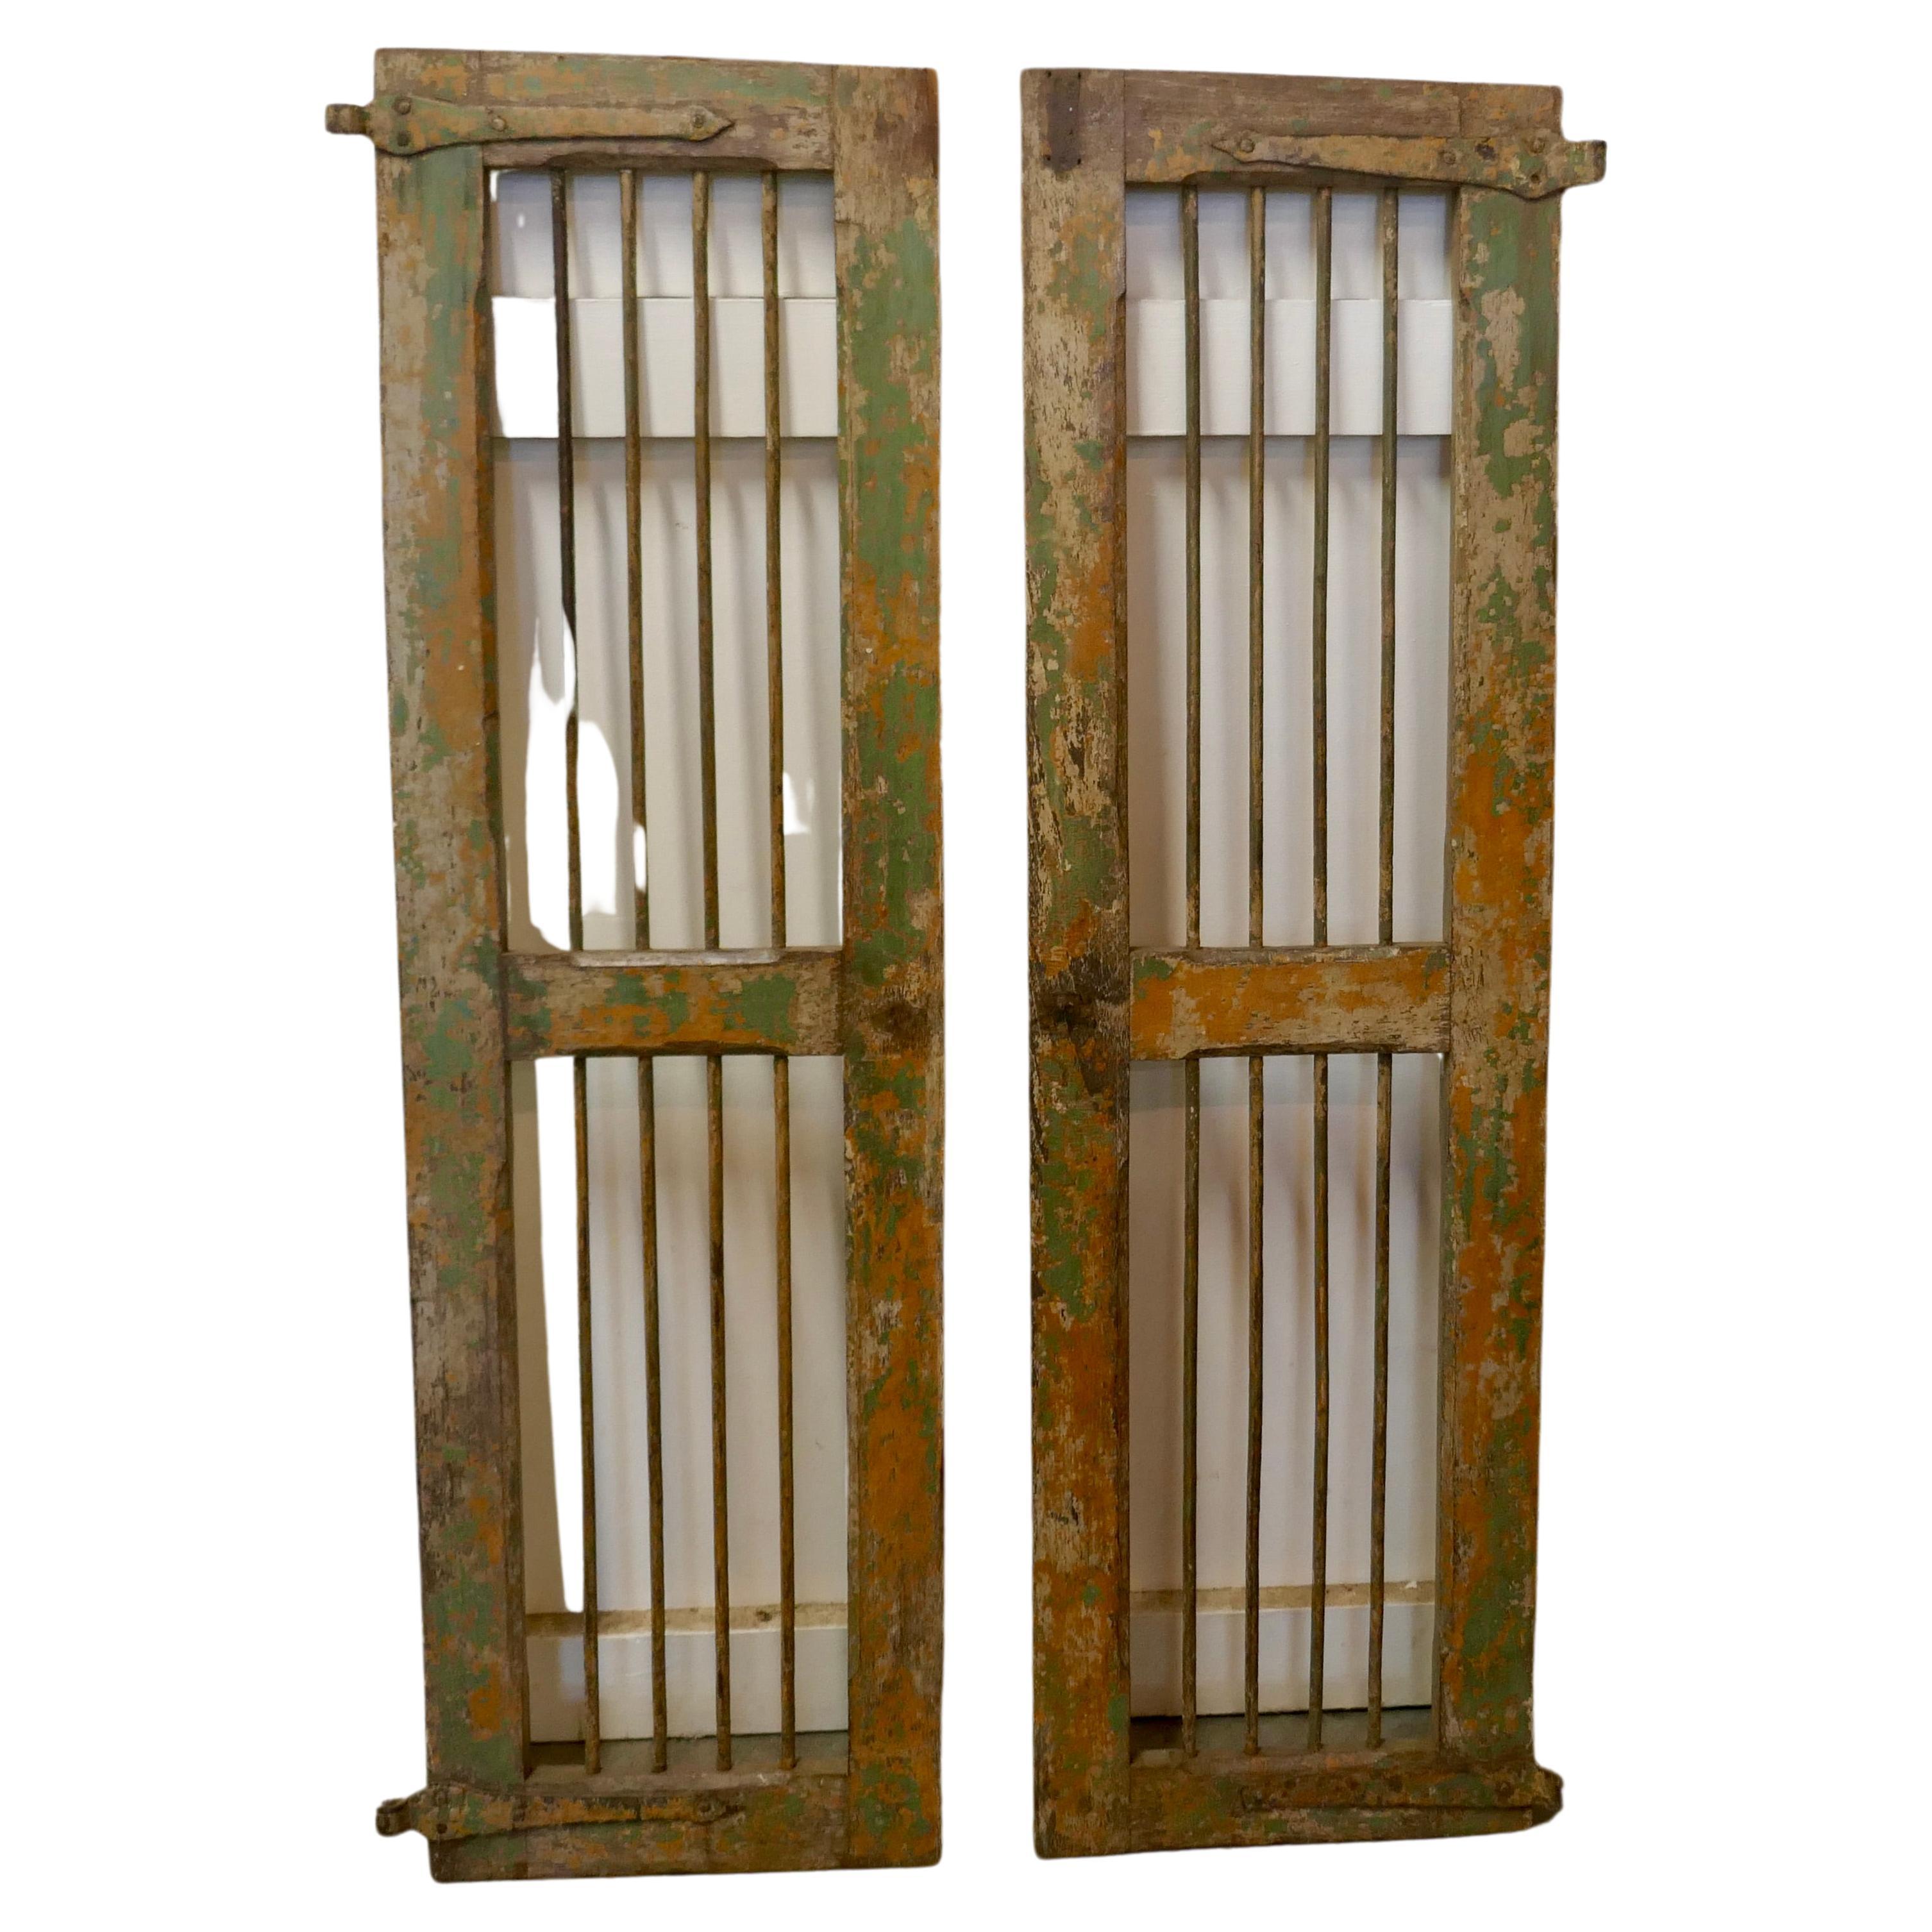 Pair of North African Wood and Iron Window Shutters